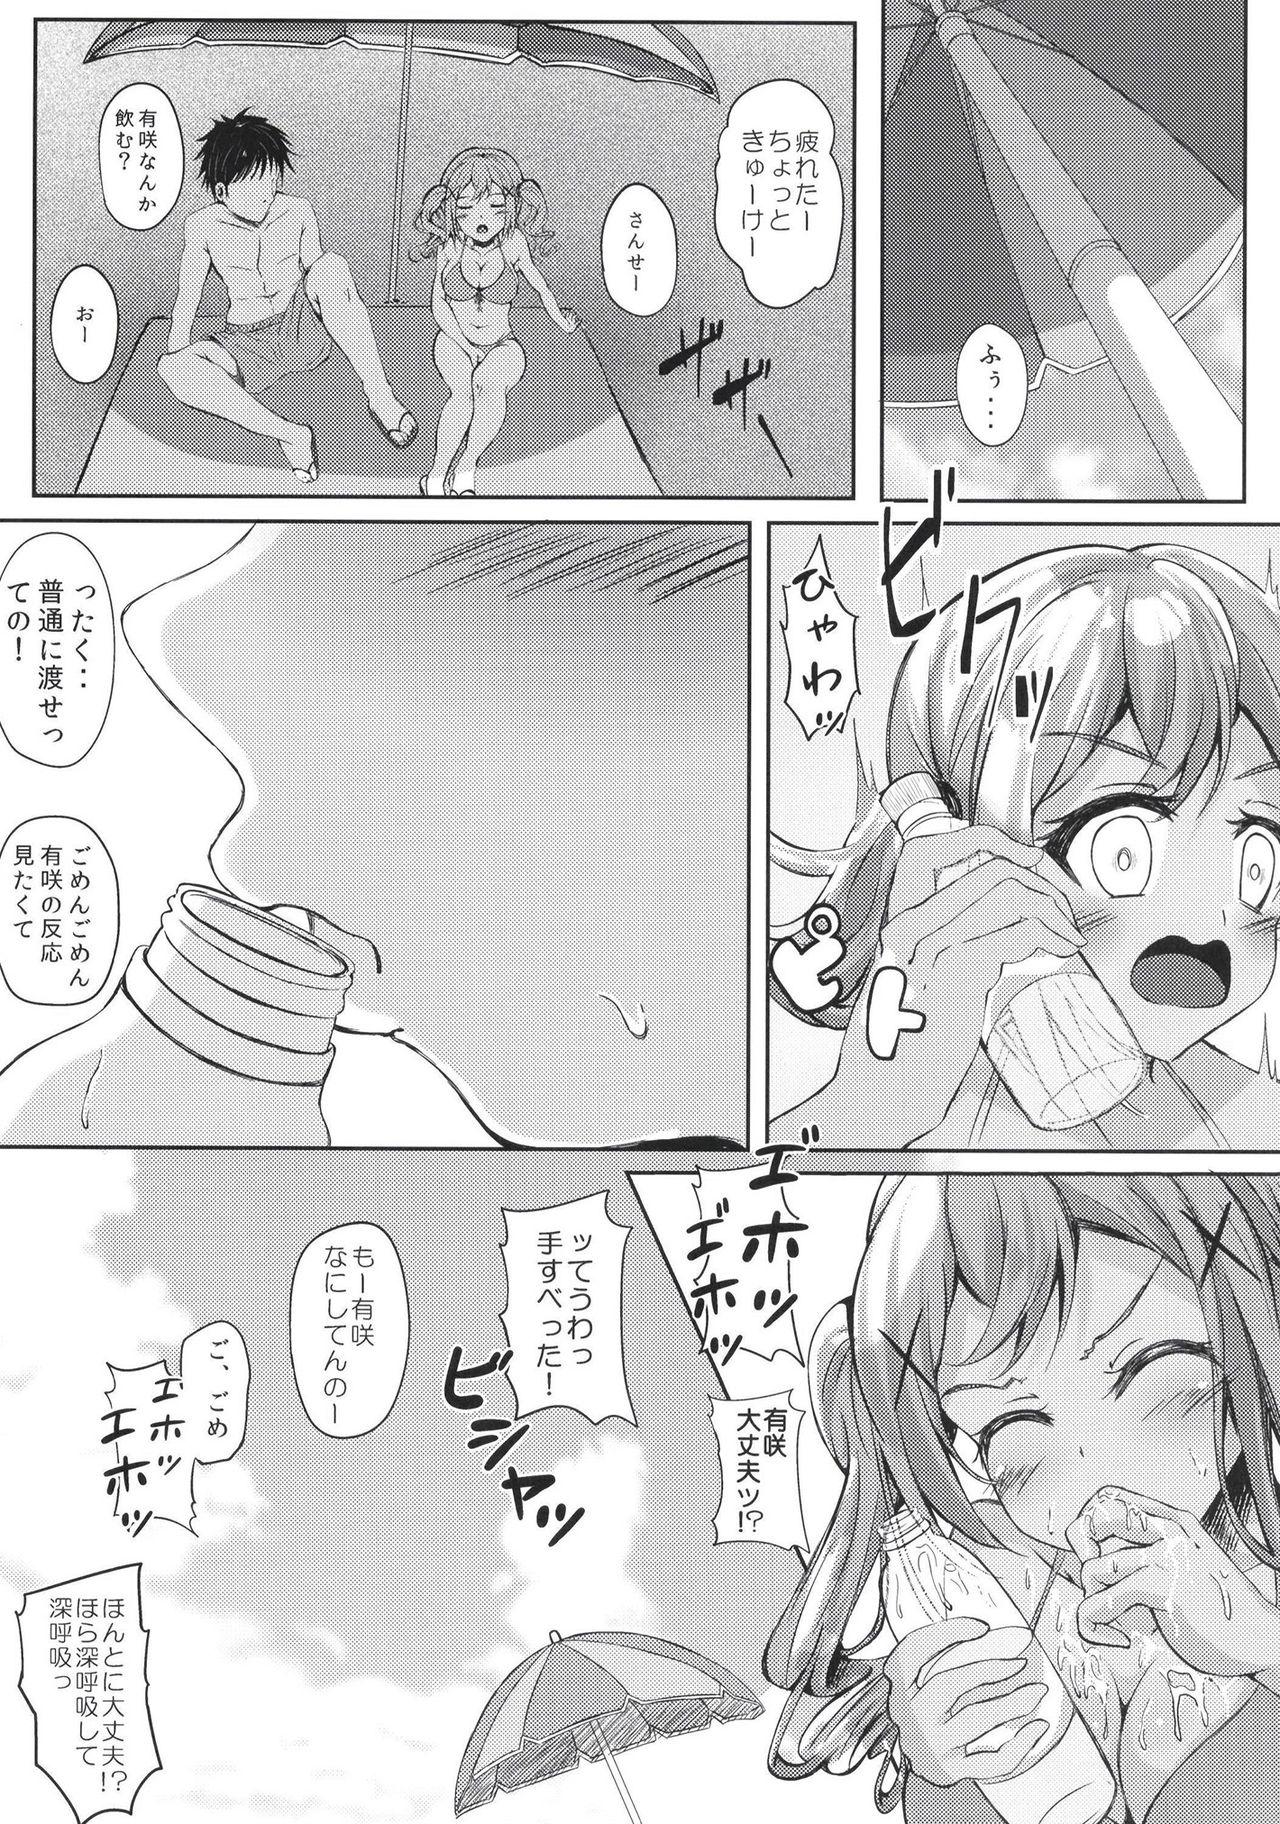 Homosexual private ~episode arisa 1.5 - Bang dream Aunty - Page 6